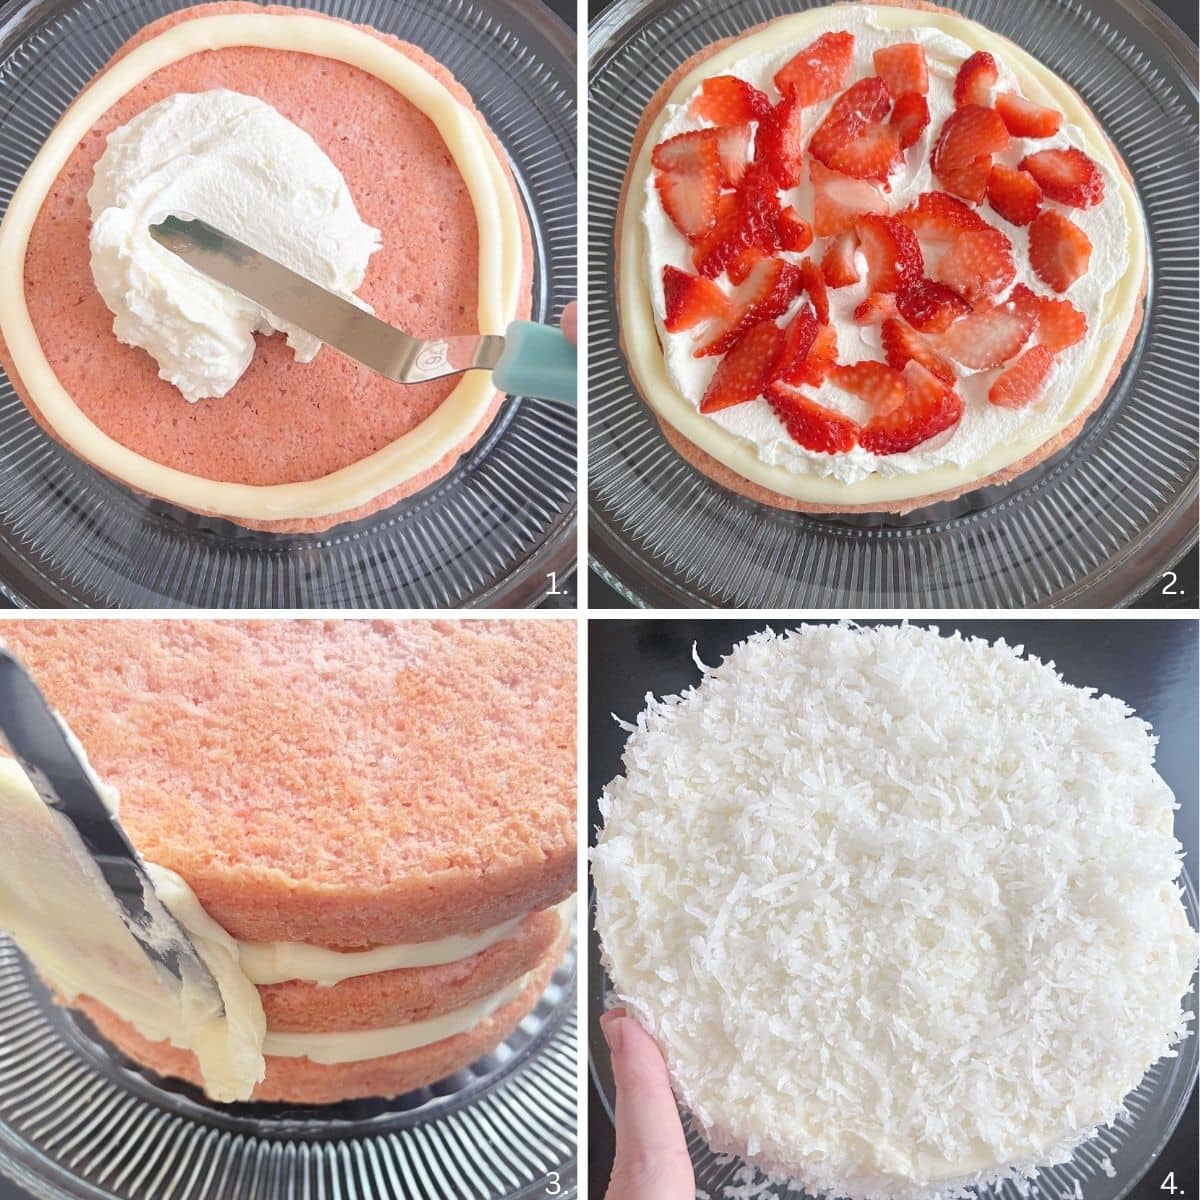 Photos of assembling and decorating the Strawberry Coconut Cake.